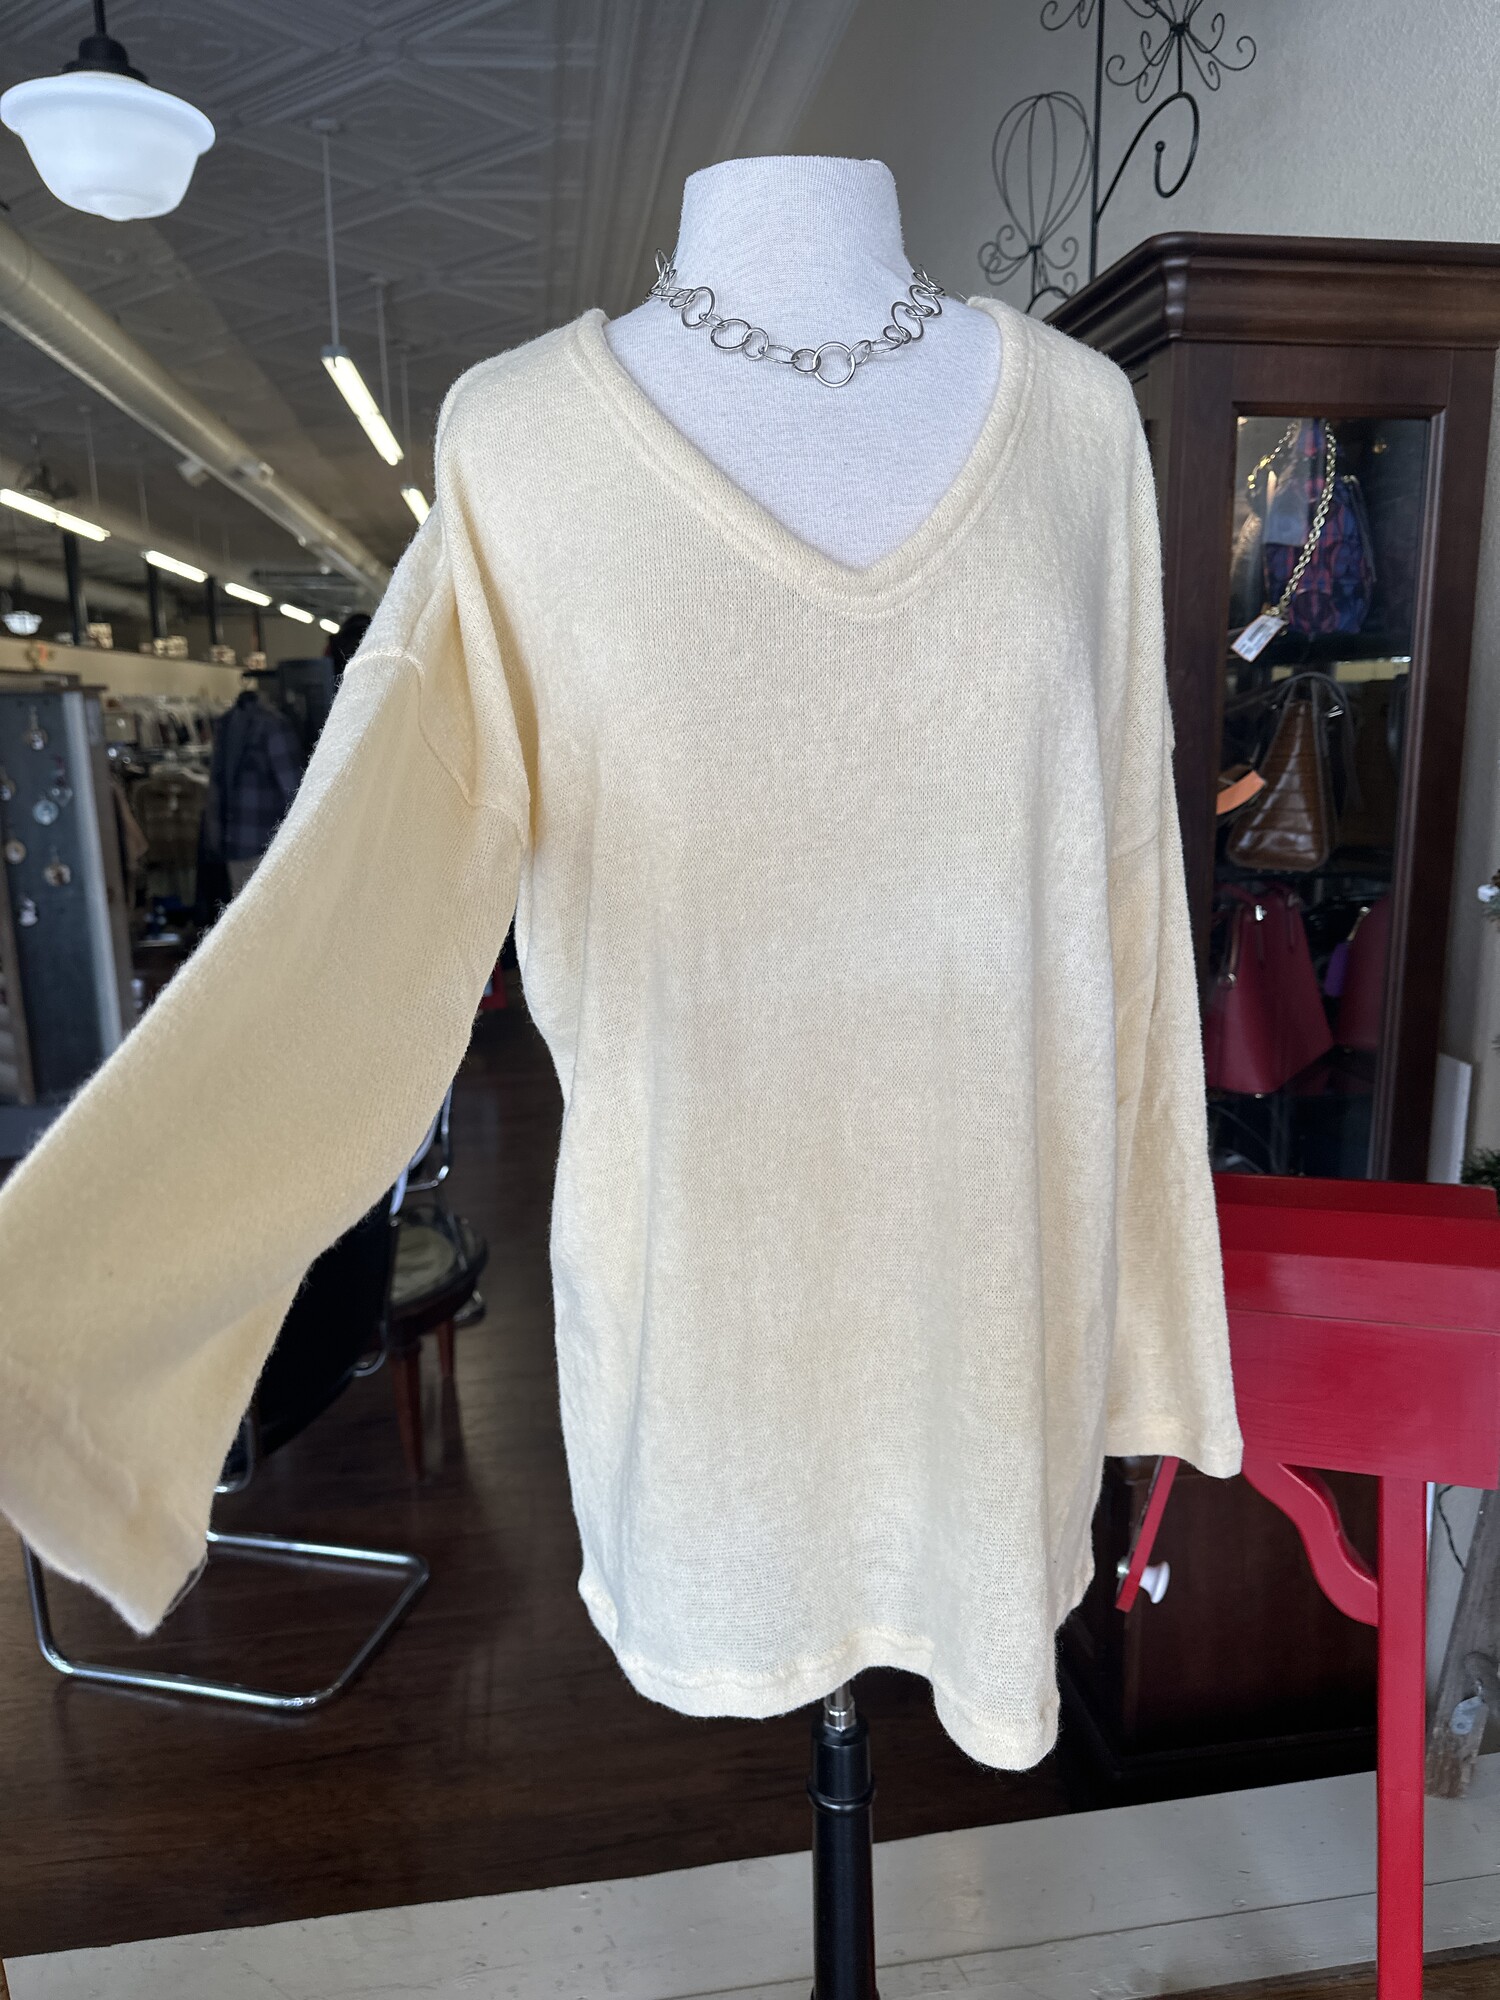 NWT Vicabo Sweater, Yellow, Size: 3X
All sales are final.
Pick up in store within 7 days of purchase or have it shipped.